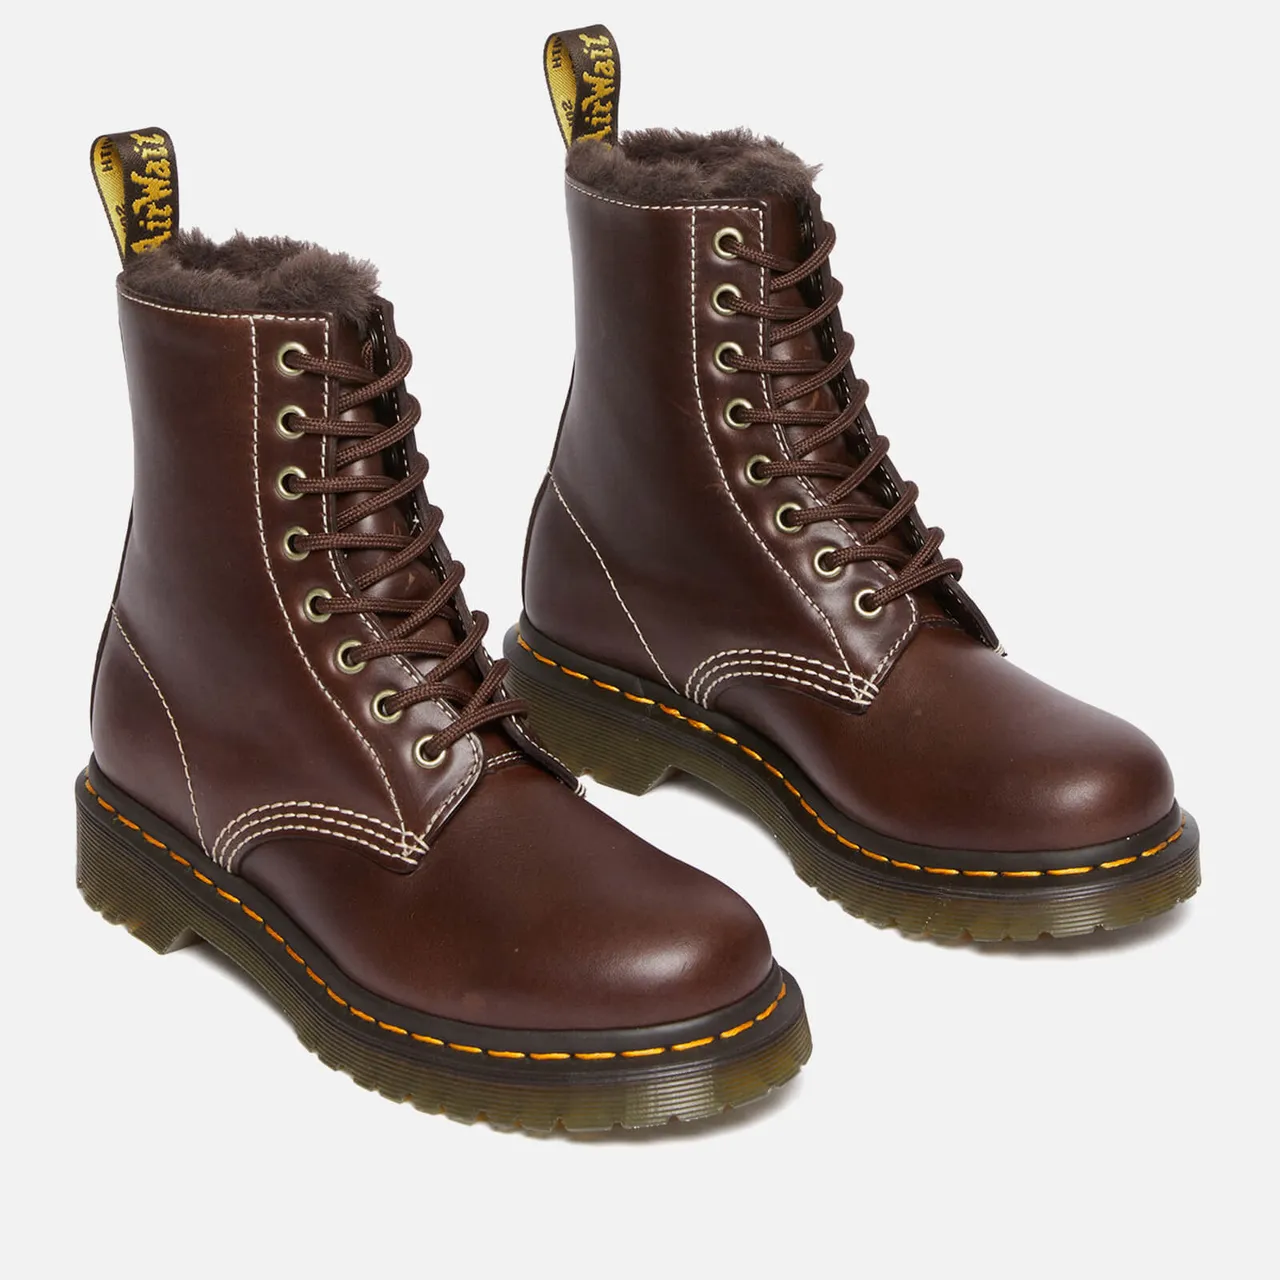 Dr. Martens Women's 1460 Serena Leather 8-Eye Boots - UK